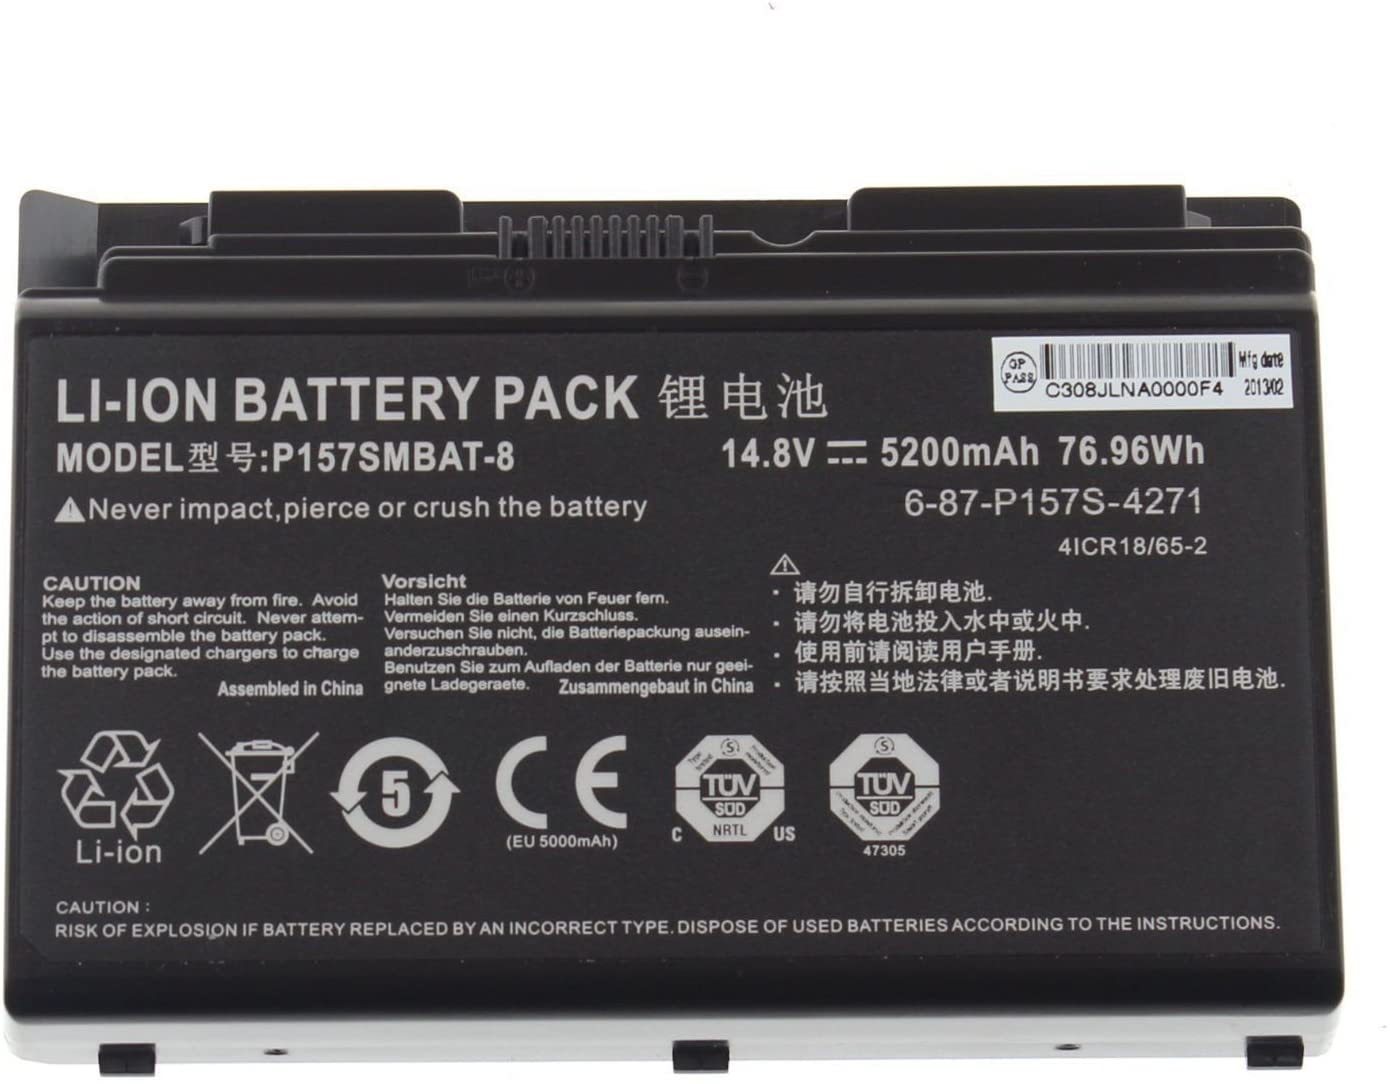 14.8V 76.96wh P157SMBAT-8 Laptop Battery compatible with CLEVO Terransforce P157S P157SM P177SM-A K780S-i7 K780E 6-87-P157S-4271